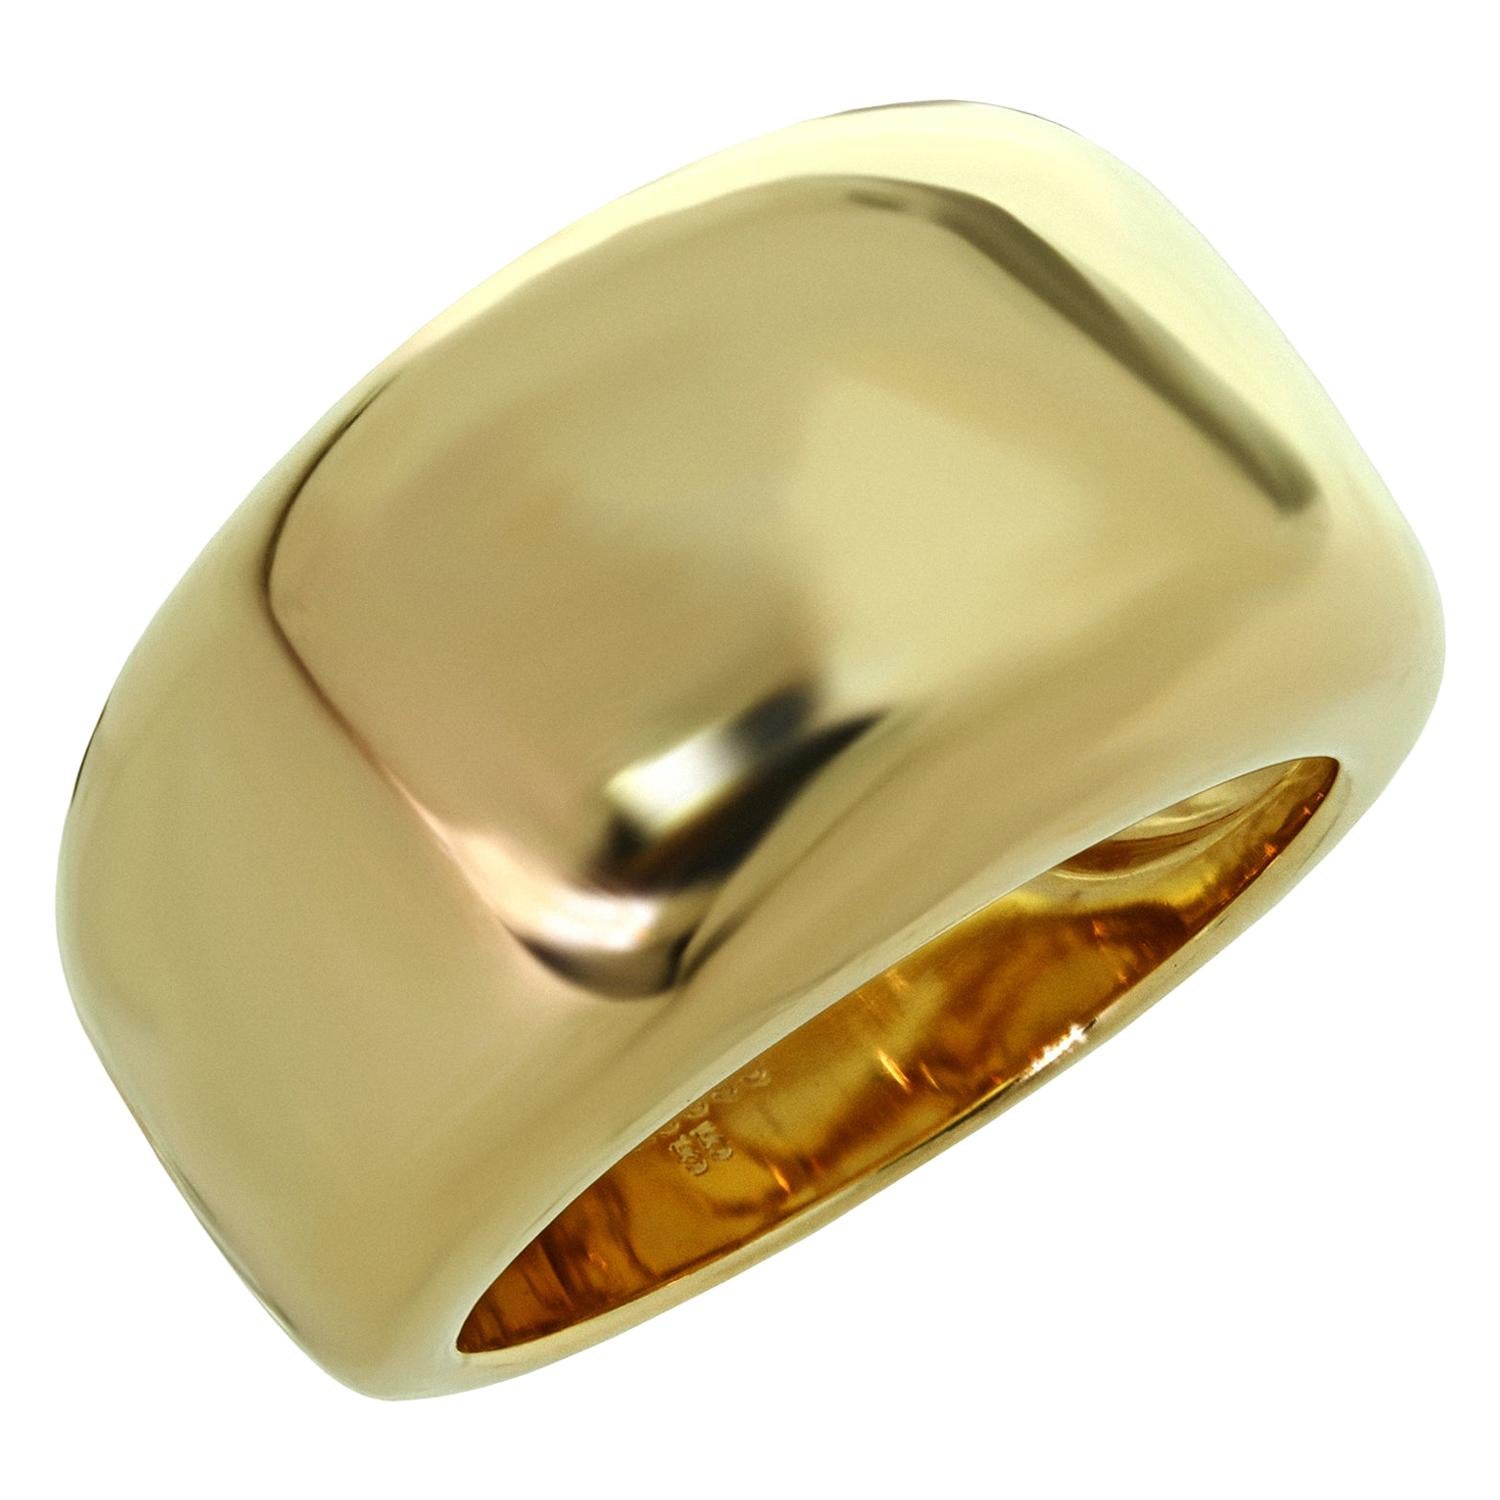 Cartier Nouvelle Vague Yellow Gold Domed Band Ring Sz, EU 55 - US 7.25 For Sale